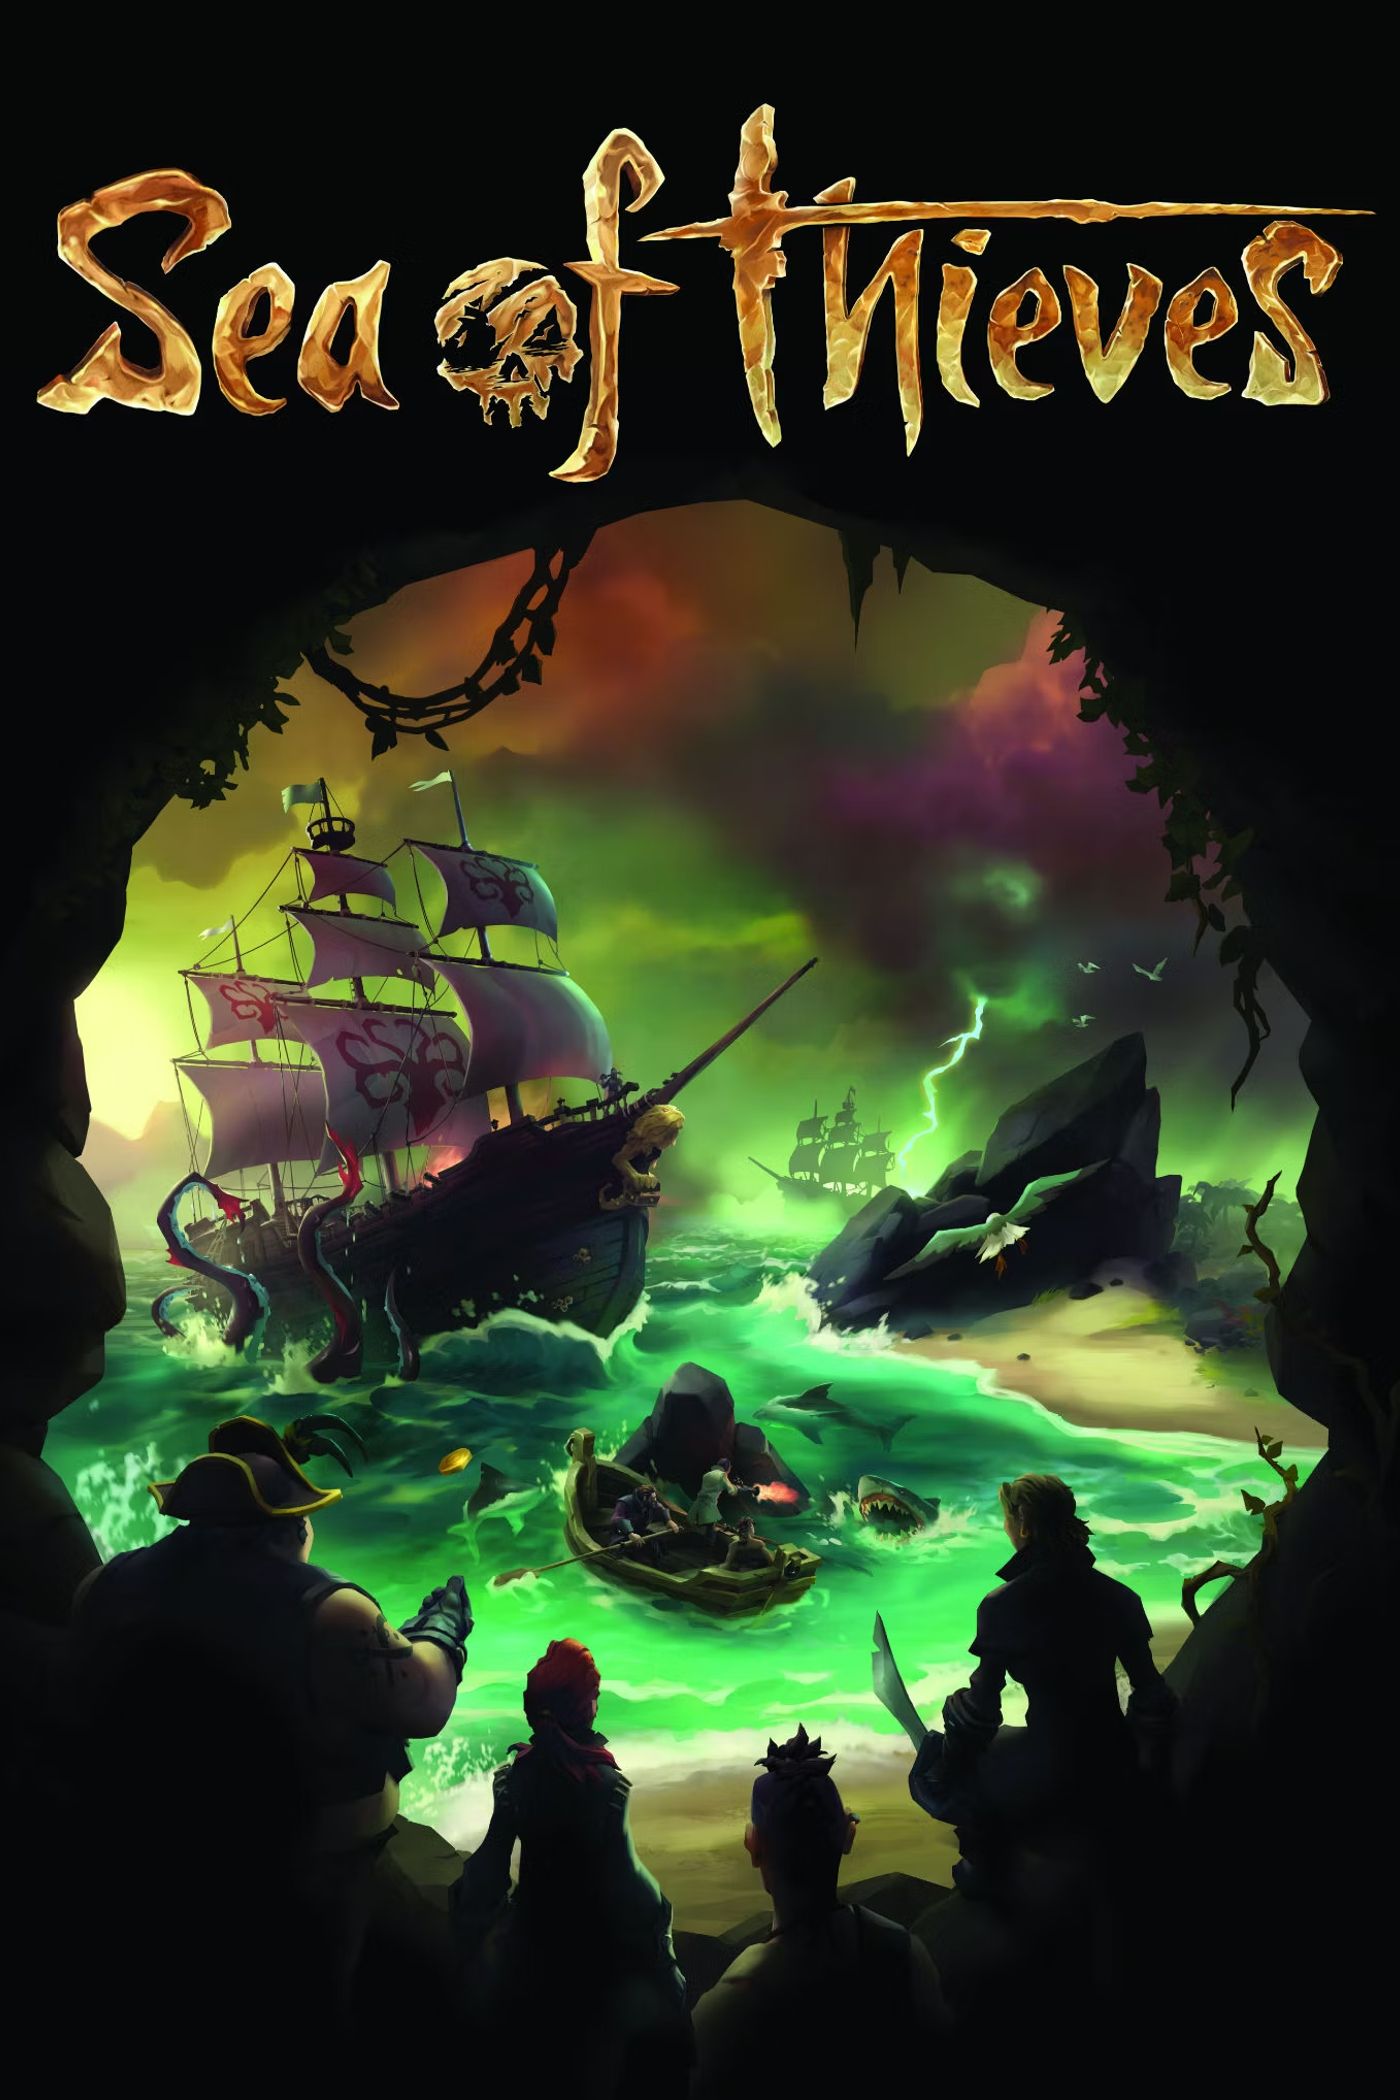 Arte-chave do Sea-of-Thieves